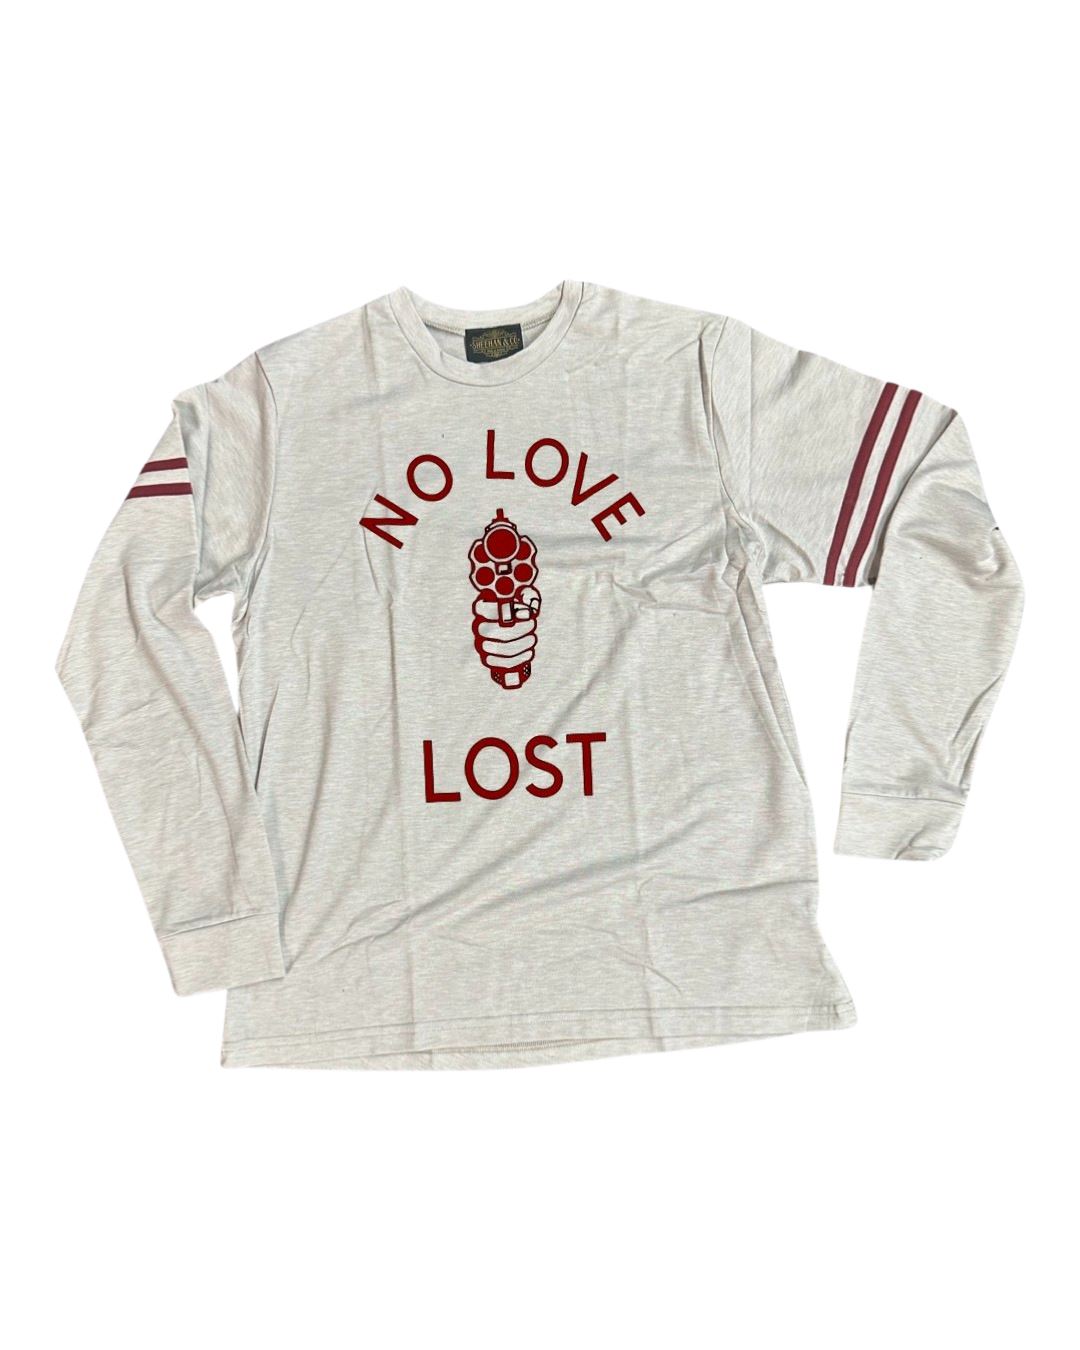 No Love Lost Statement on Long Sleeve Stapped Arm Sweatshirt by Sheehan&co - Sheehan and Co.